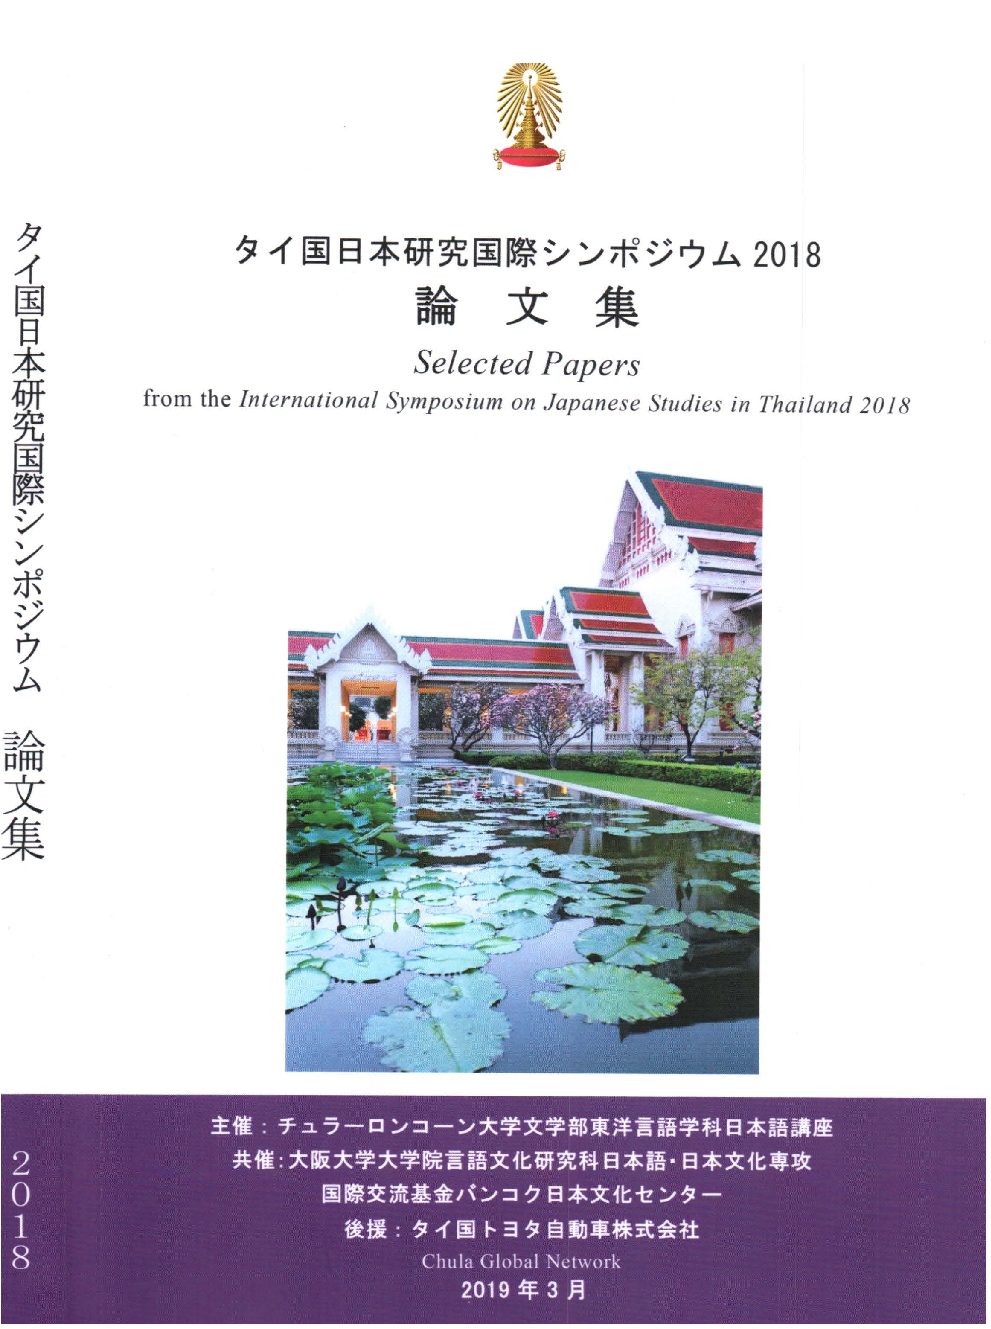 Selected Papers from the International Symposium on Japanese Studies in Thailand 2018